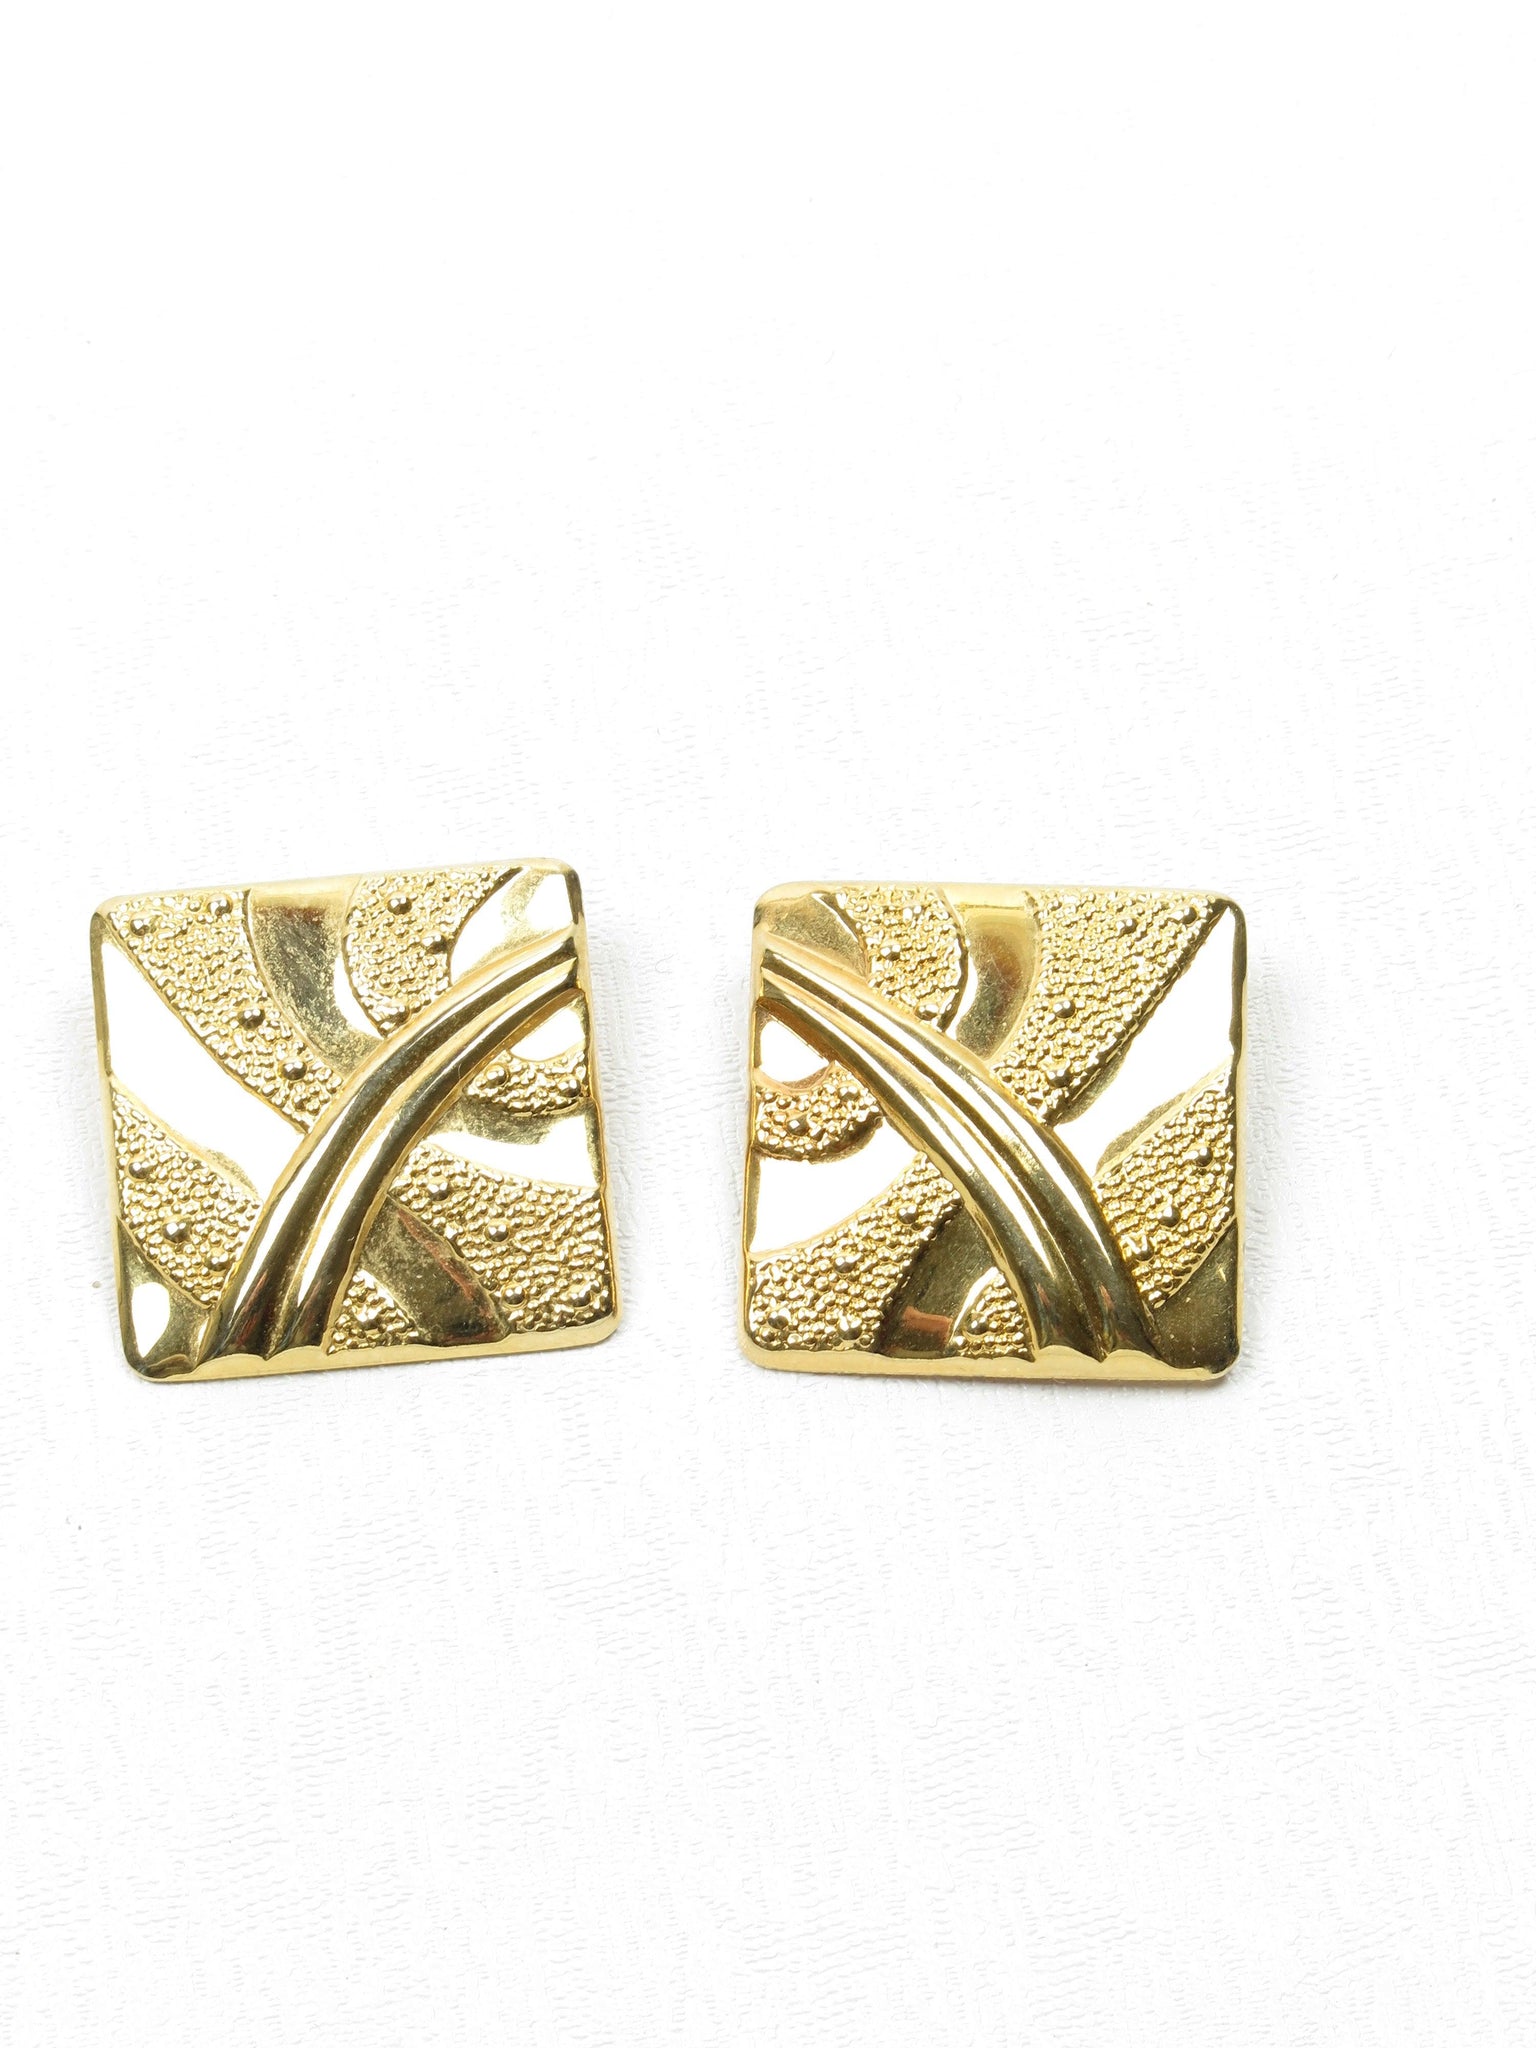 Gold Coloured Square 1980s  Clip On Earrings - The Harlequin